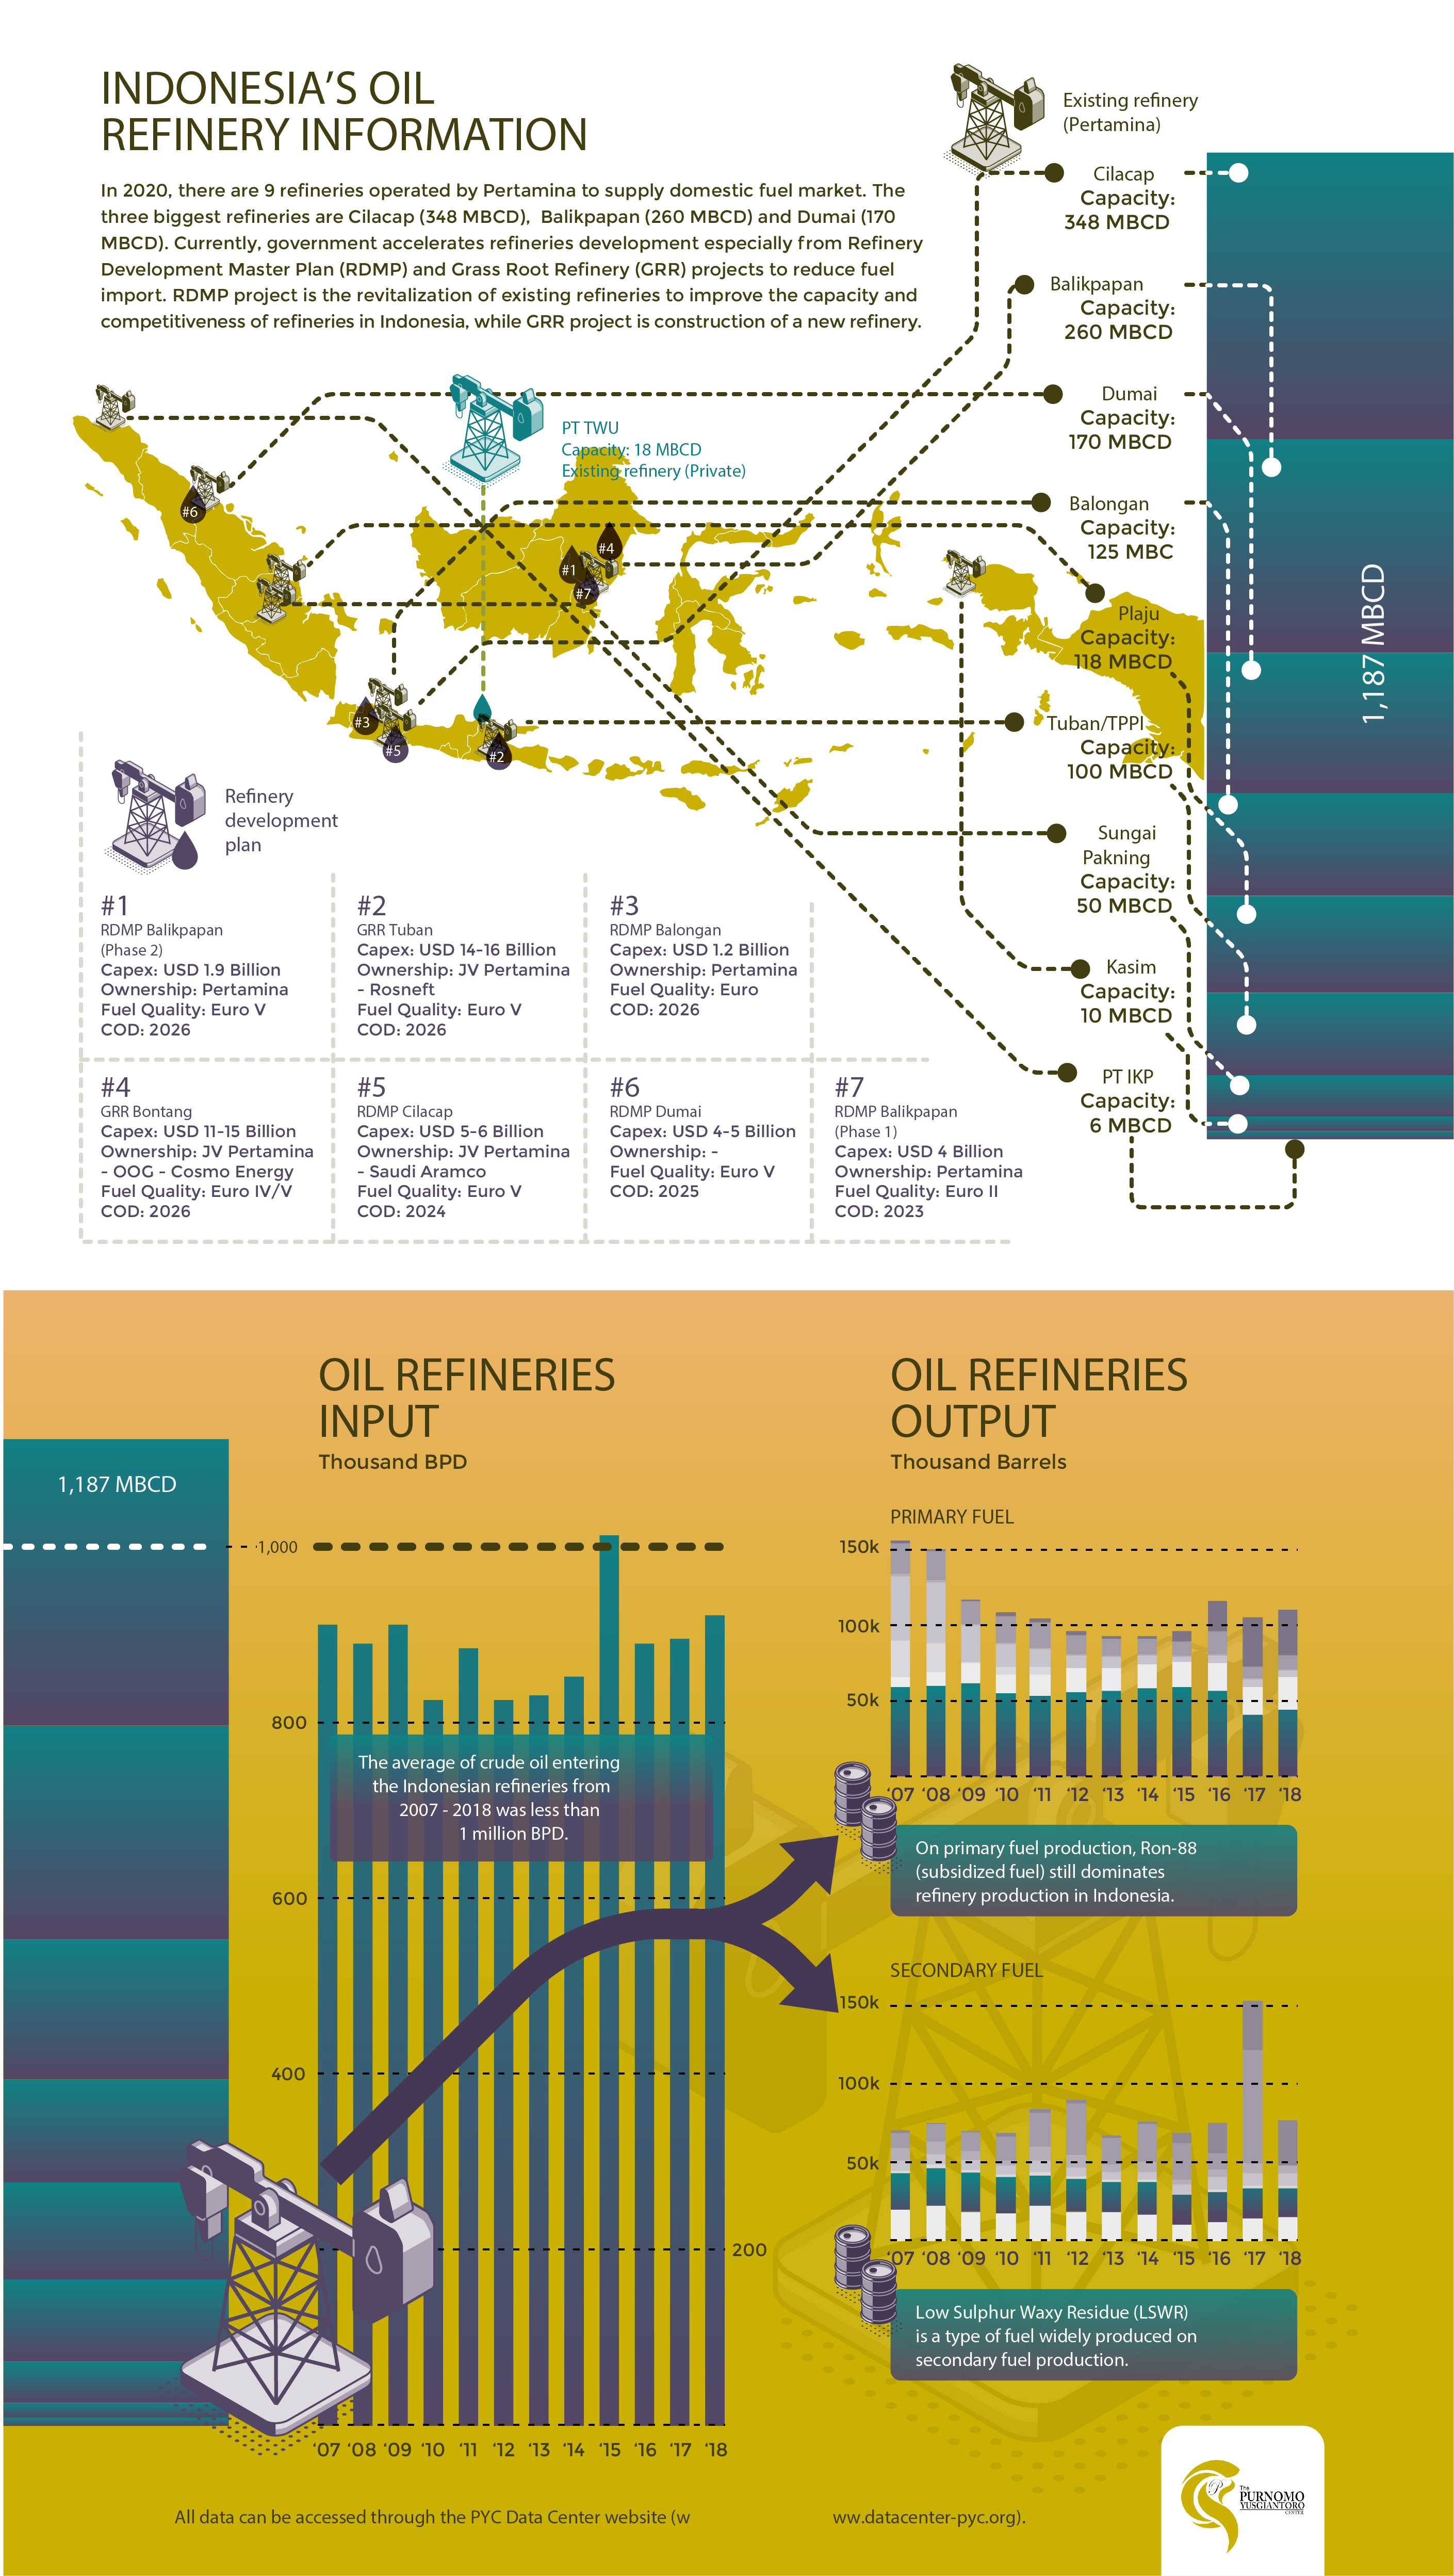 WASTE-TO-ENERGY IN INDONESIA OPPORTUNITIES AND CHALLENGES